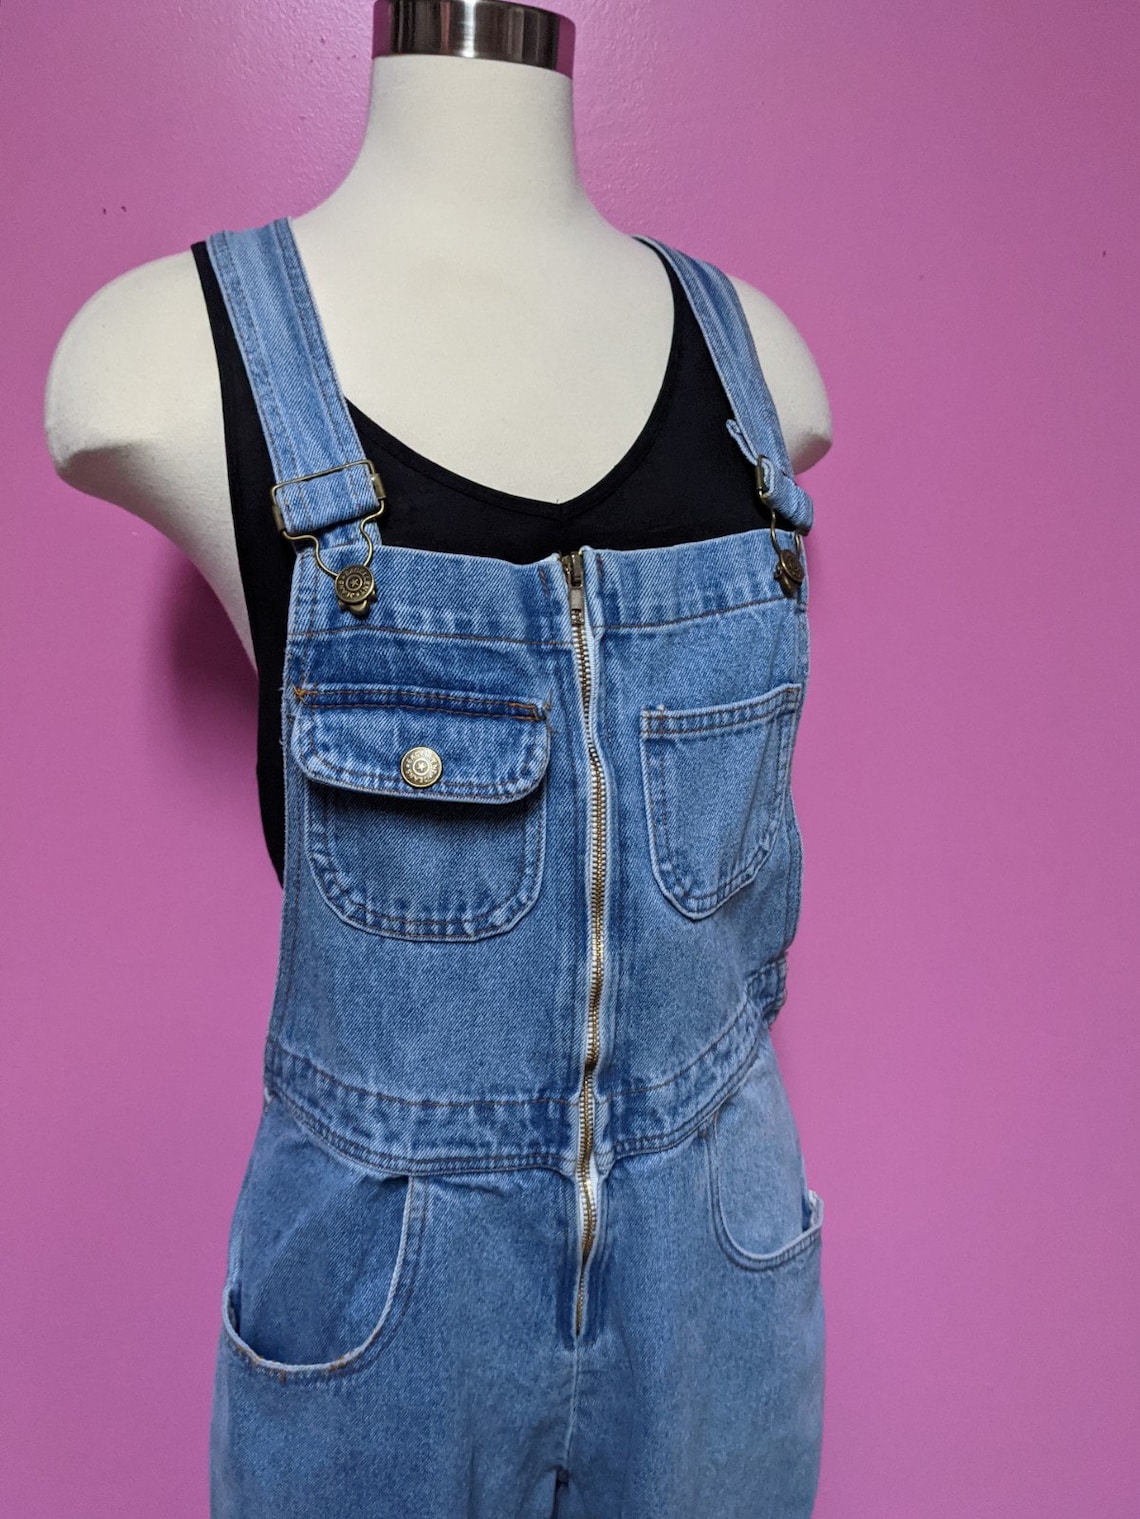 90's Zip Front Denim Overalls/Size Small/Tapered Leg | Etsy